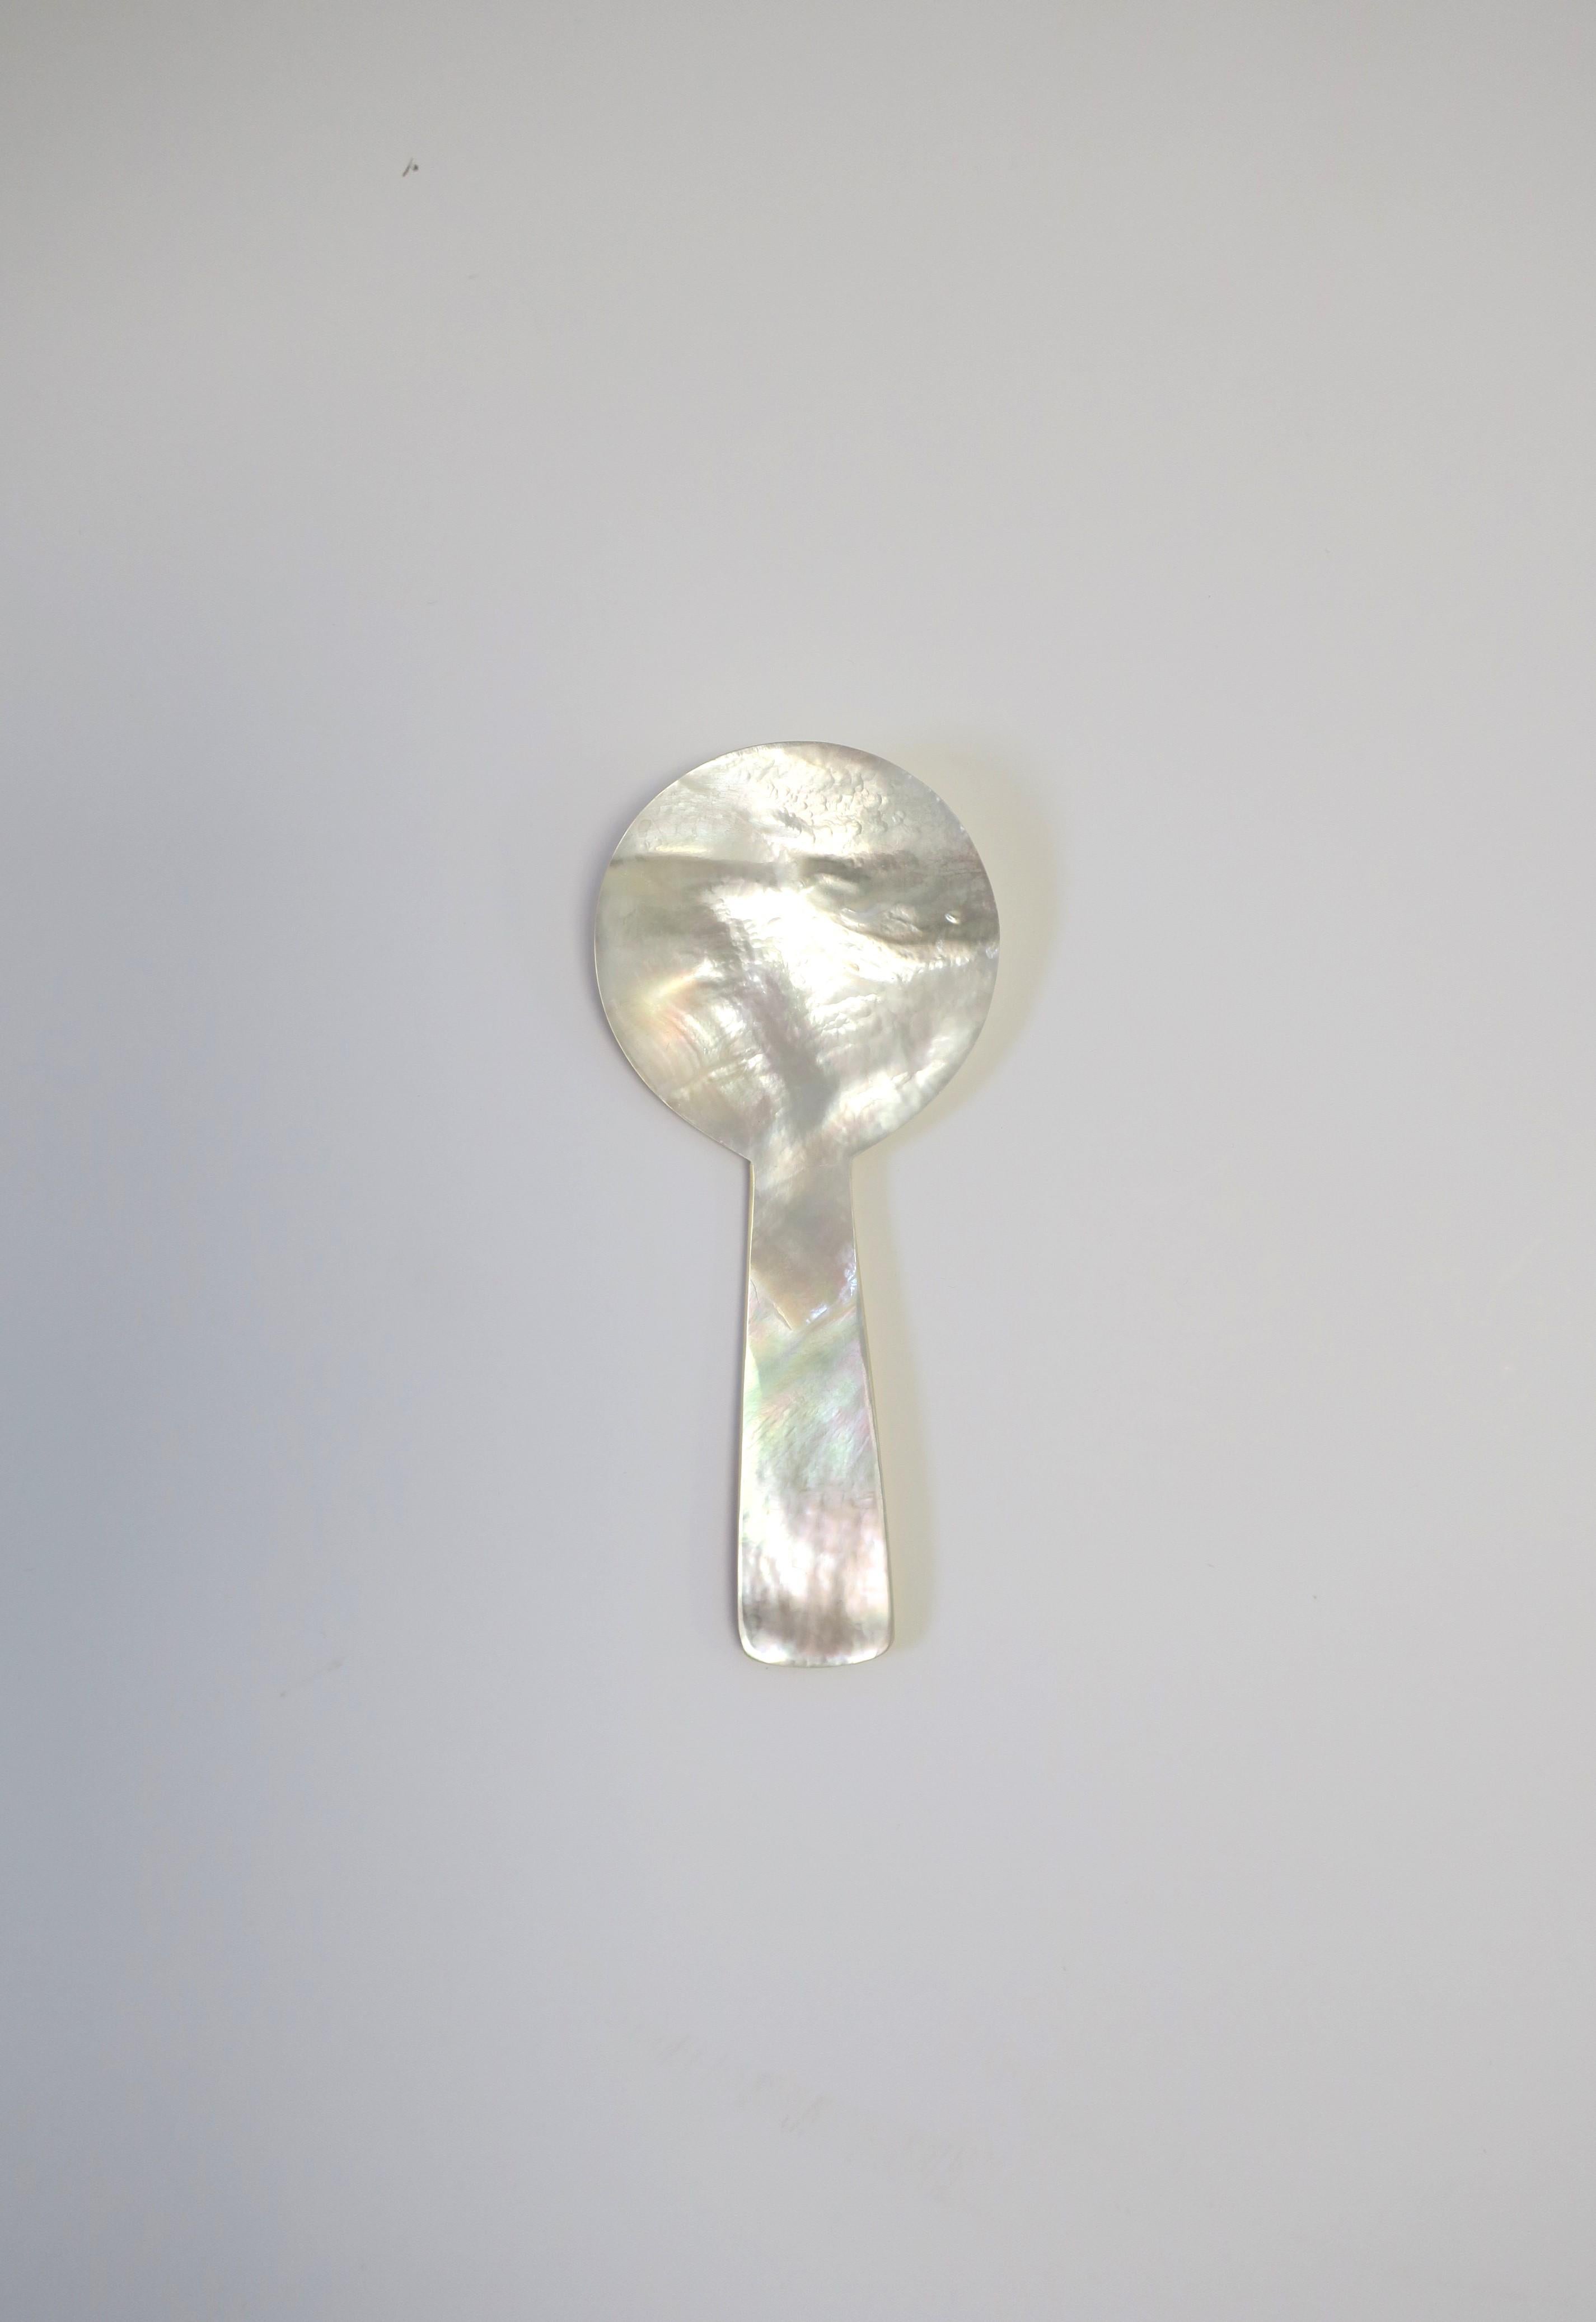 A beautiful Mother of Pearl seashell caviar serving spoon. 
Spoon measures: 2.25